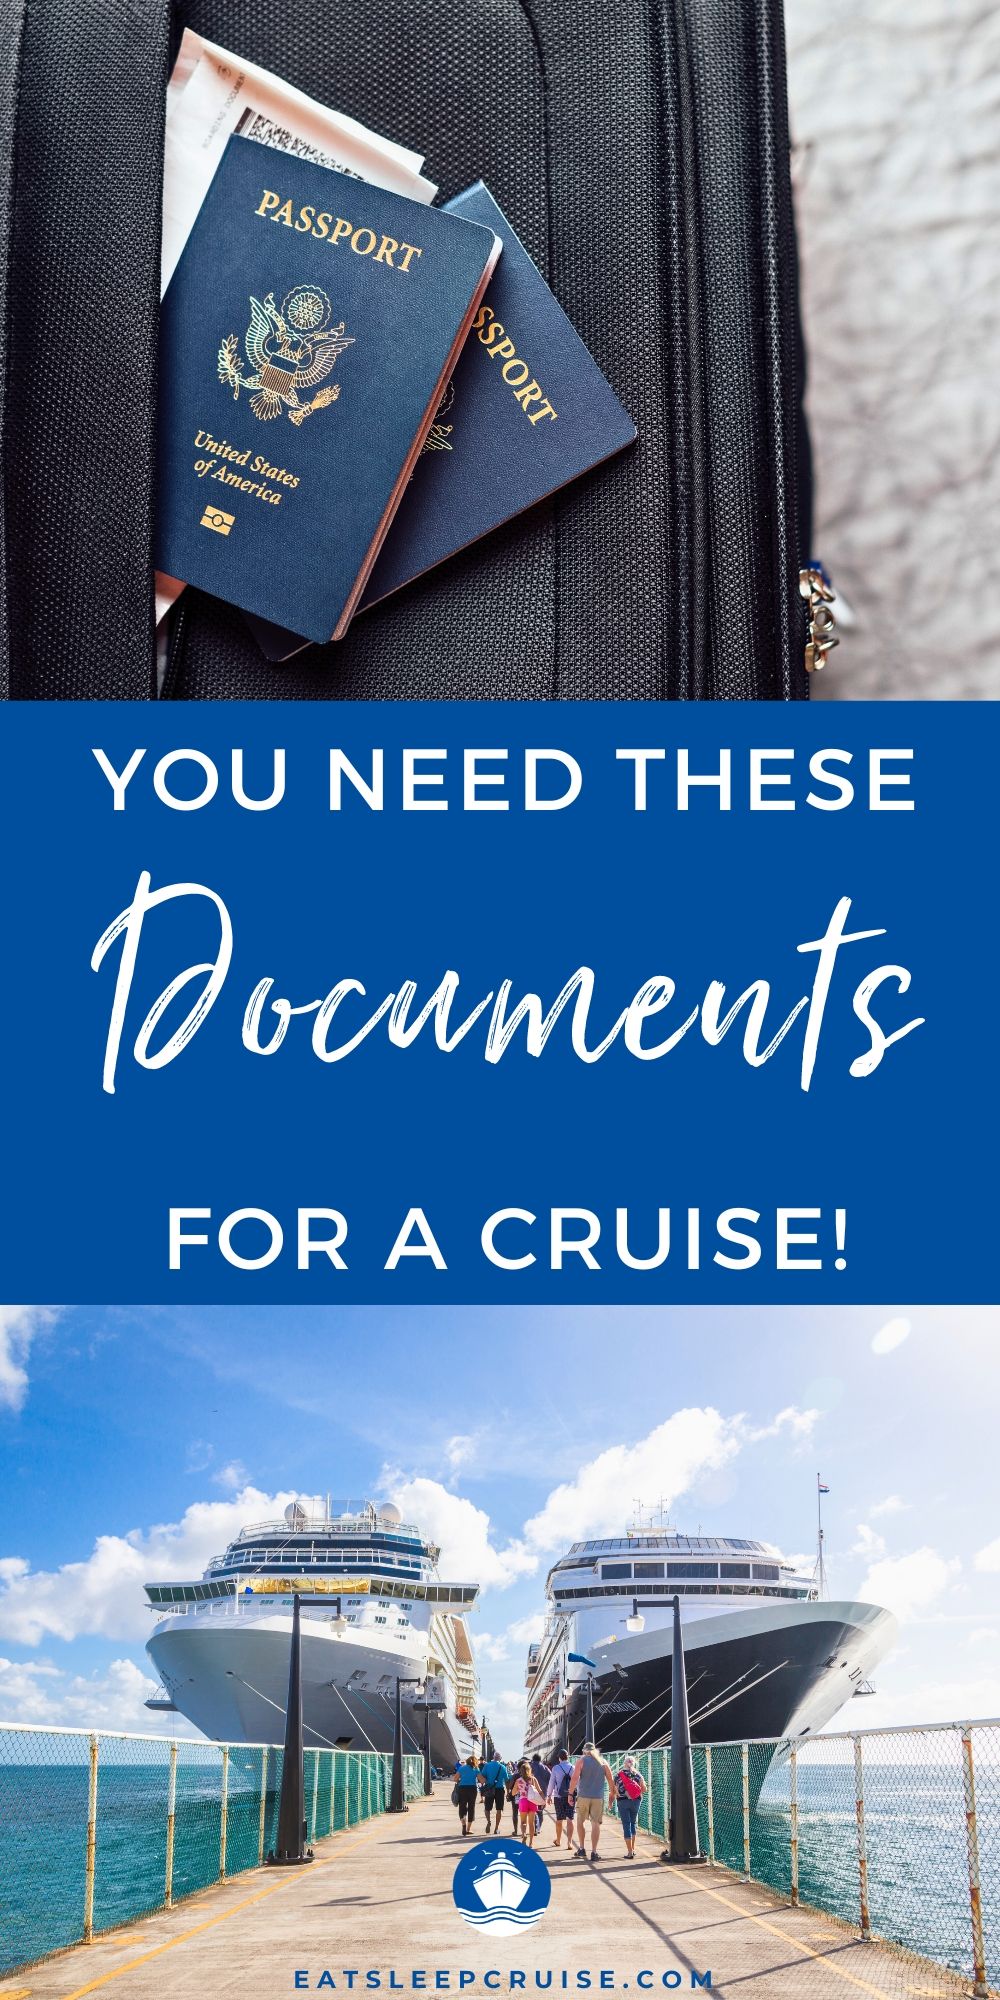 What Documents Do You Need for a Cruise?